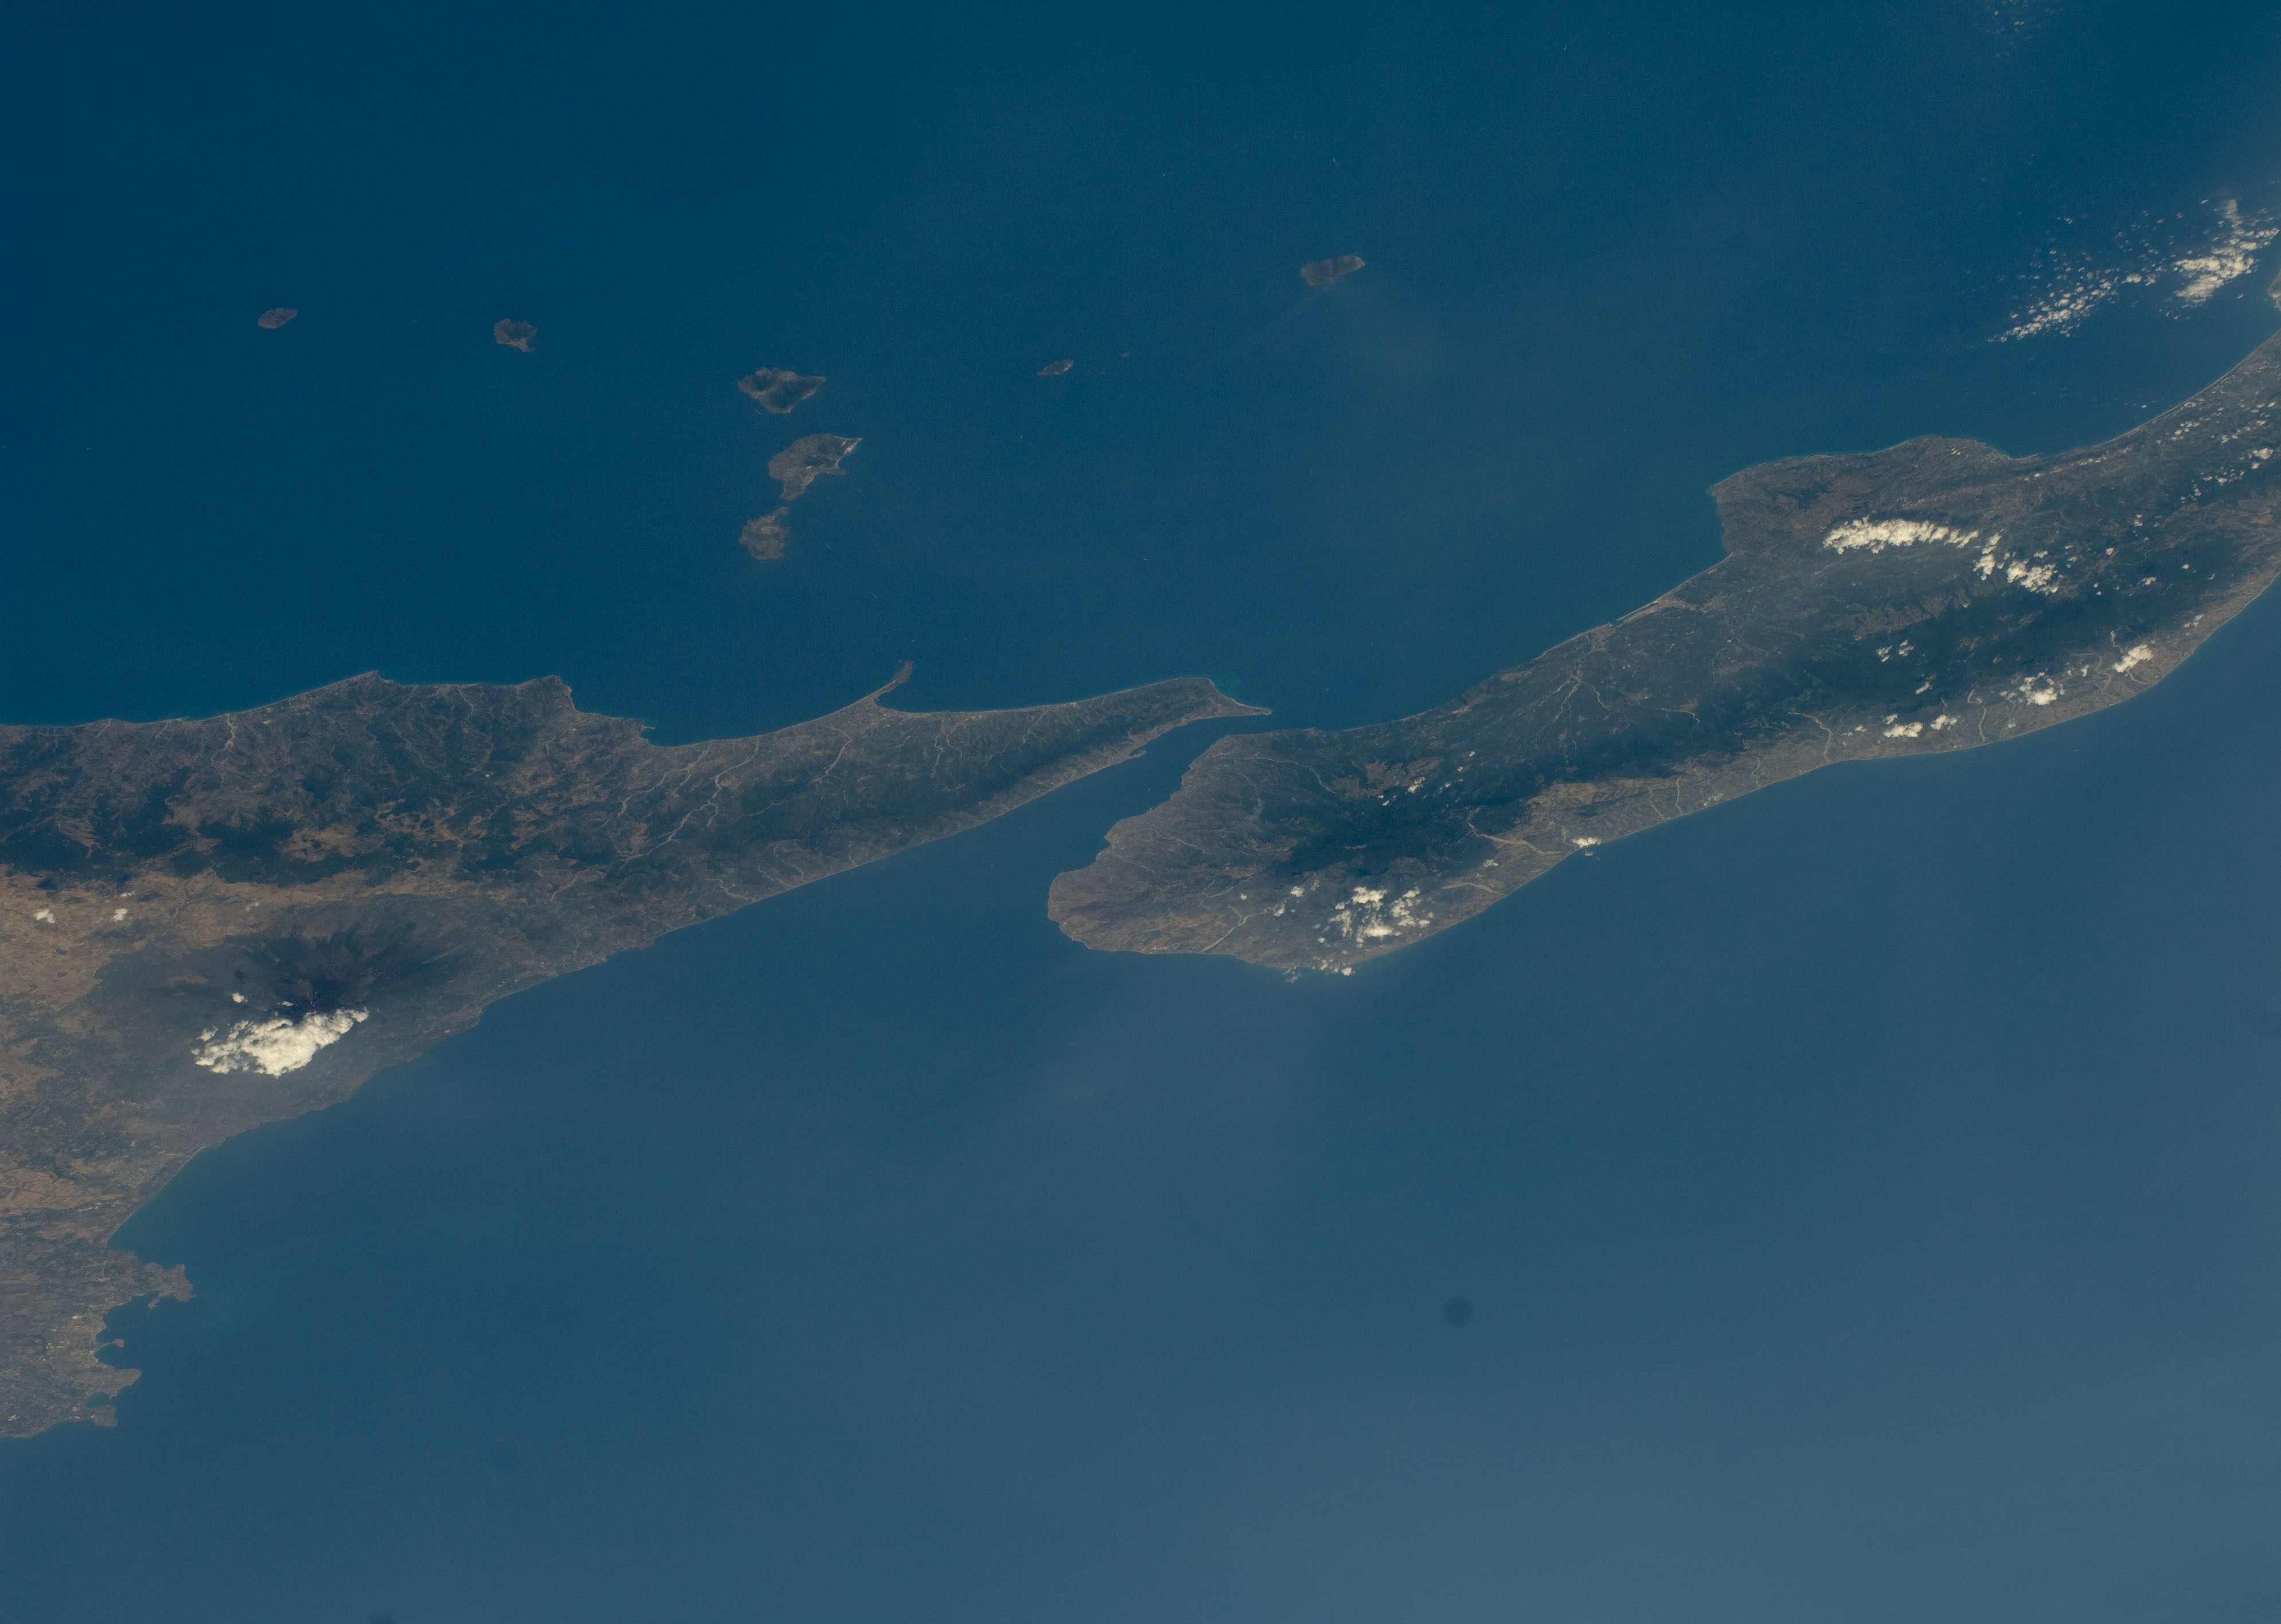 Sicily with Mt. Etna, left, and the “toe” of Italy at right